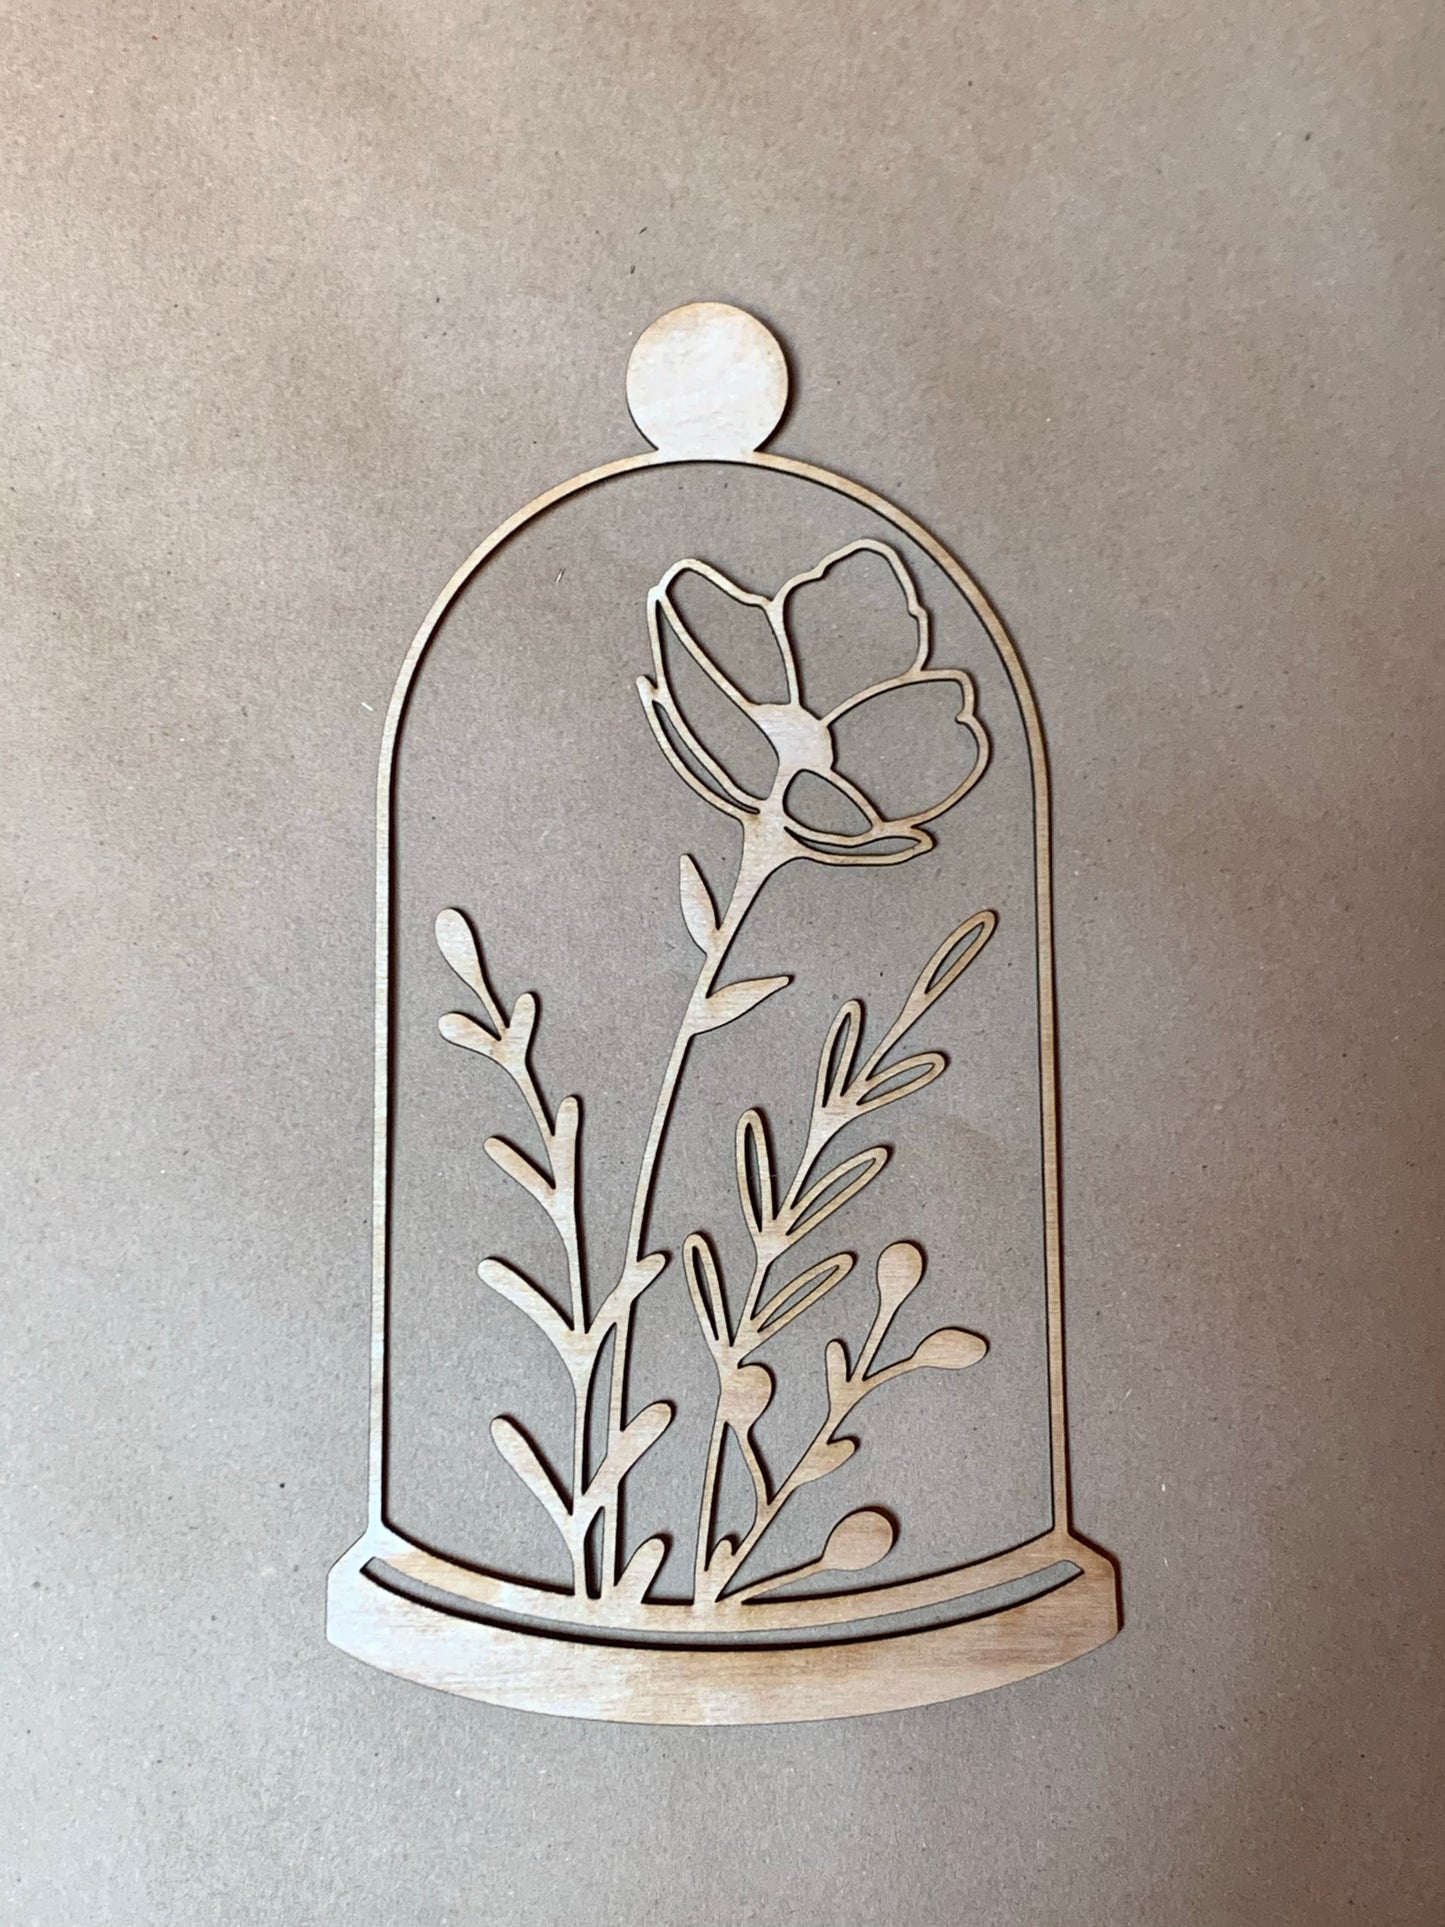 Wildflowers in Bell Cloche Wood frame. Resin art frame. DIY wood cutout. Unfinished laser cut wood resin frame. Wood blanks.